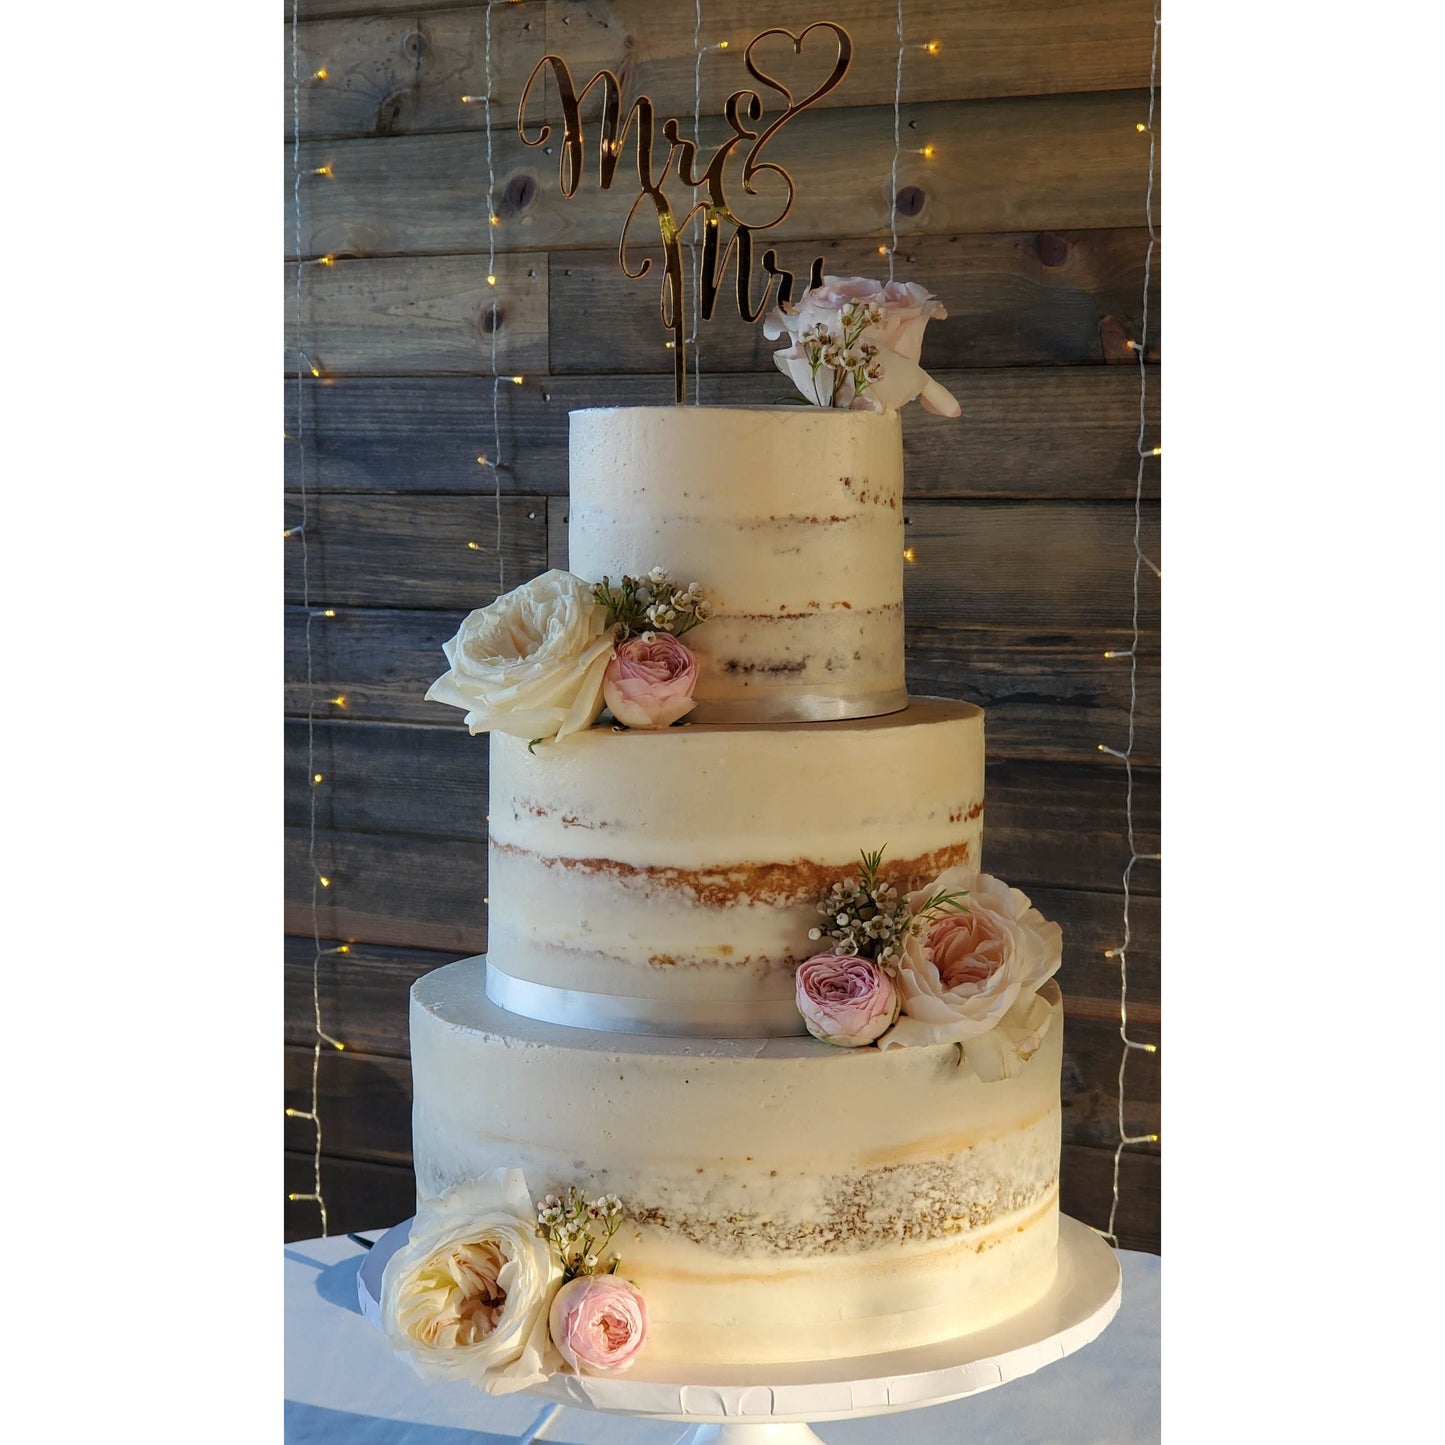 3 Tier Naked Cake with Pink and White Roses